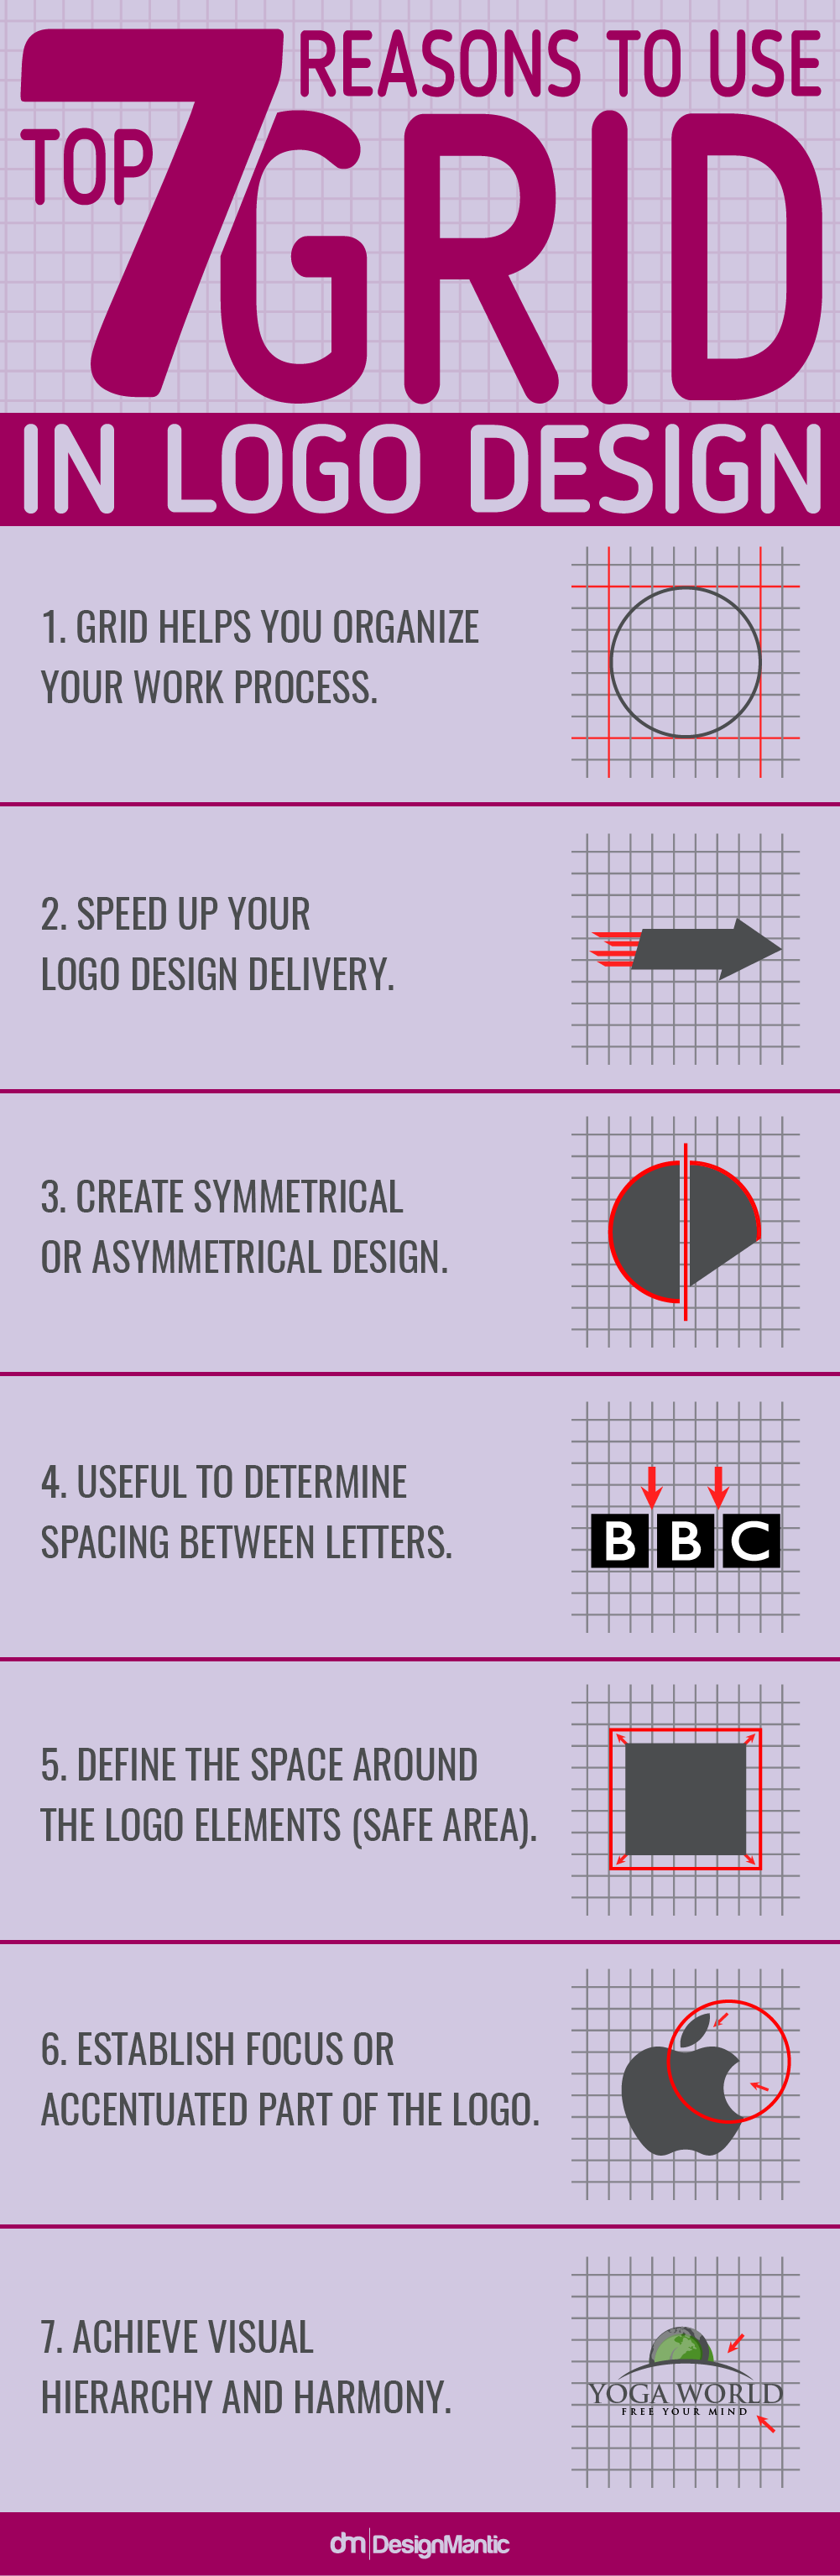 7 Reasons to Use Grids in Logo Design